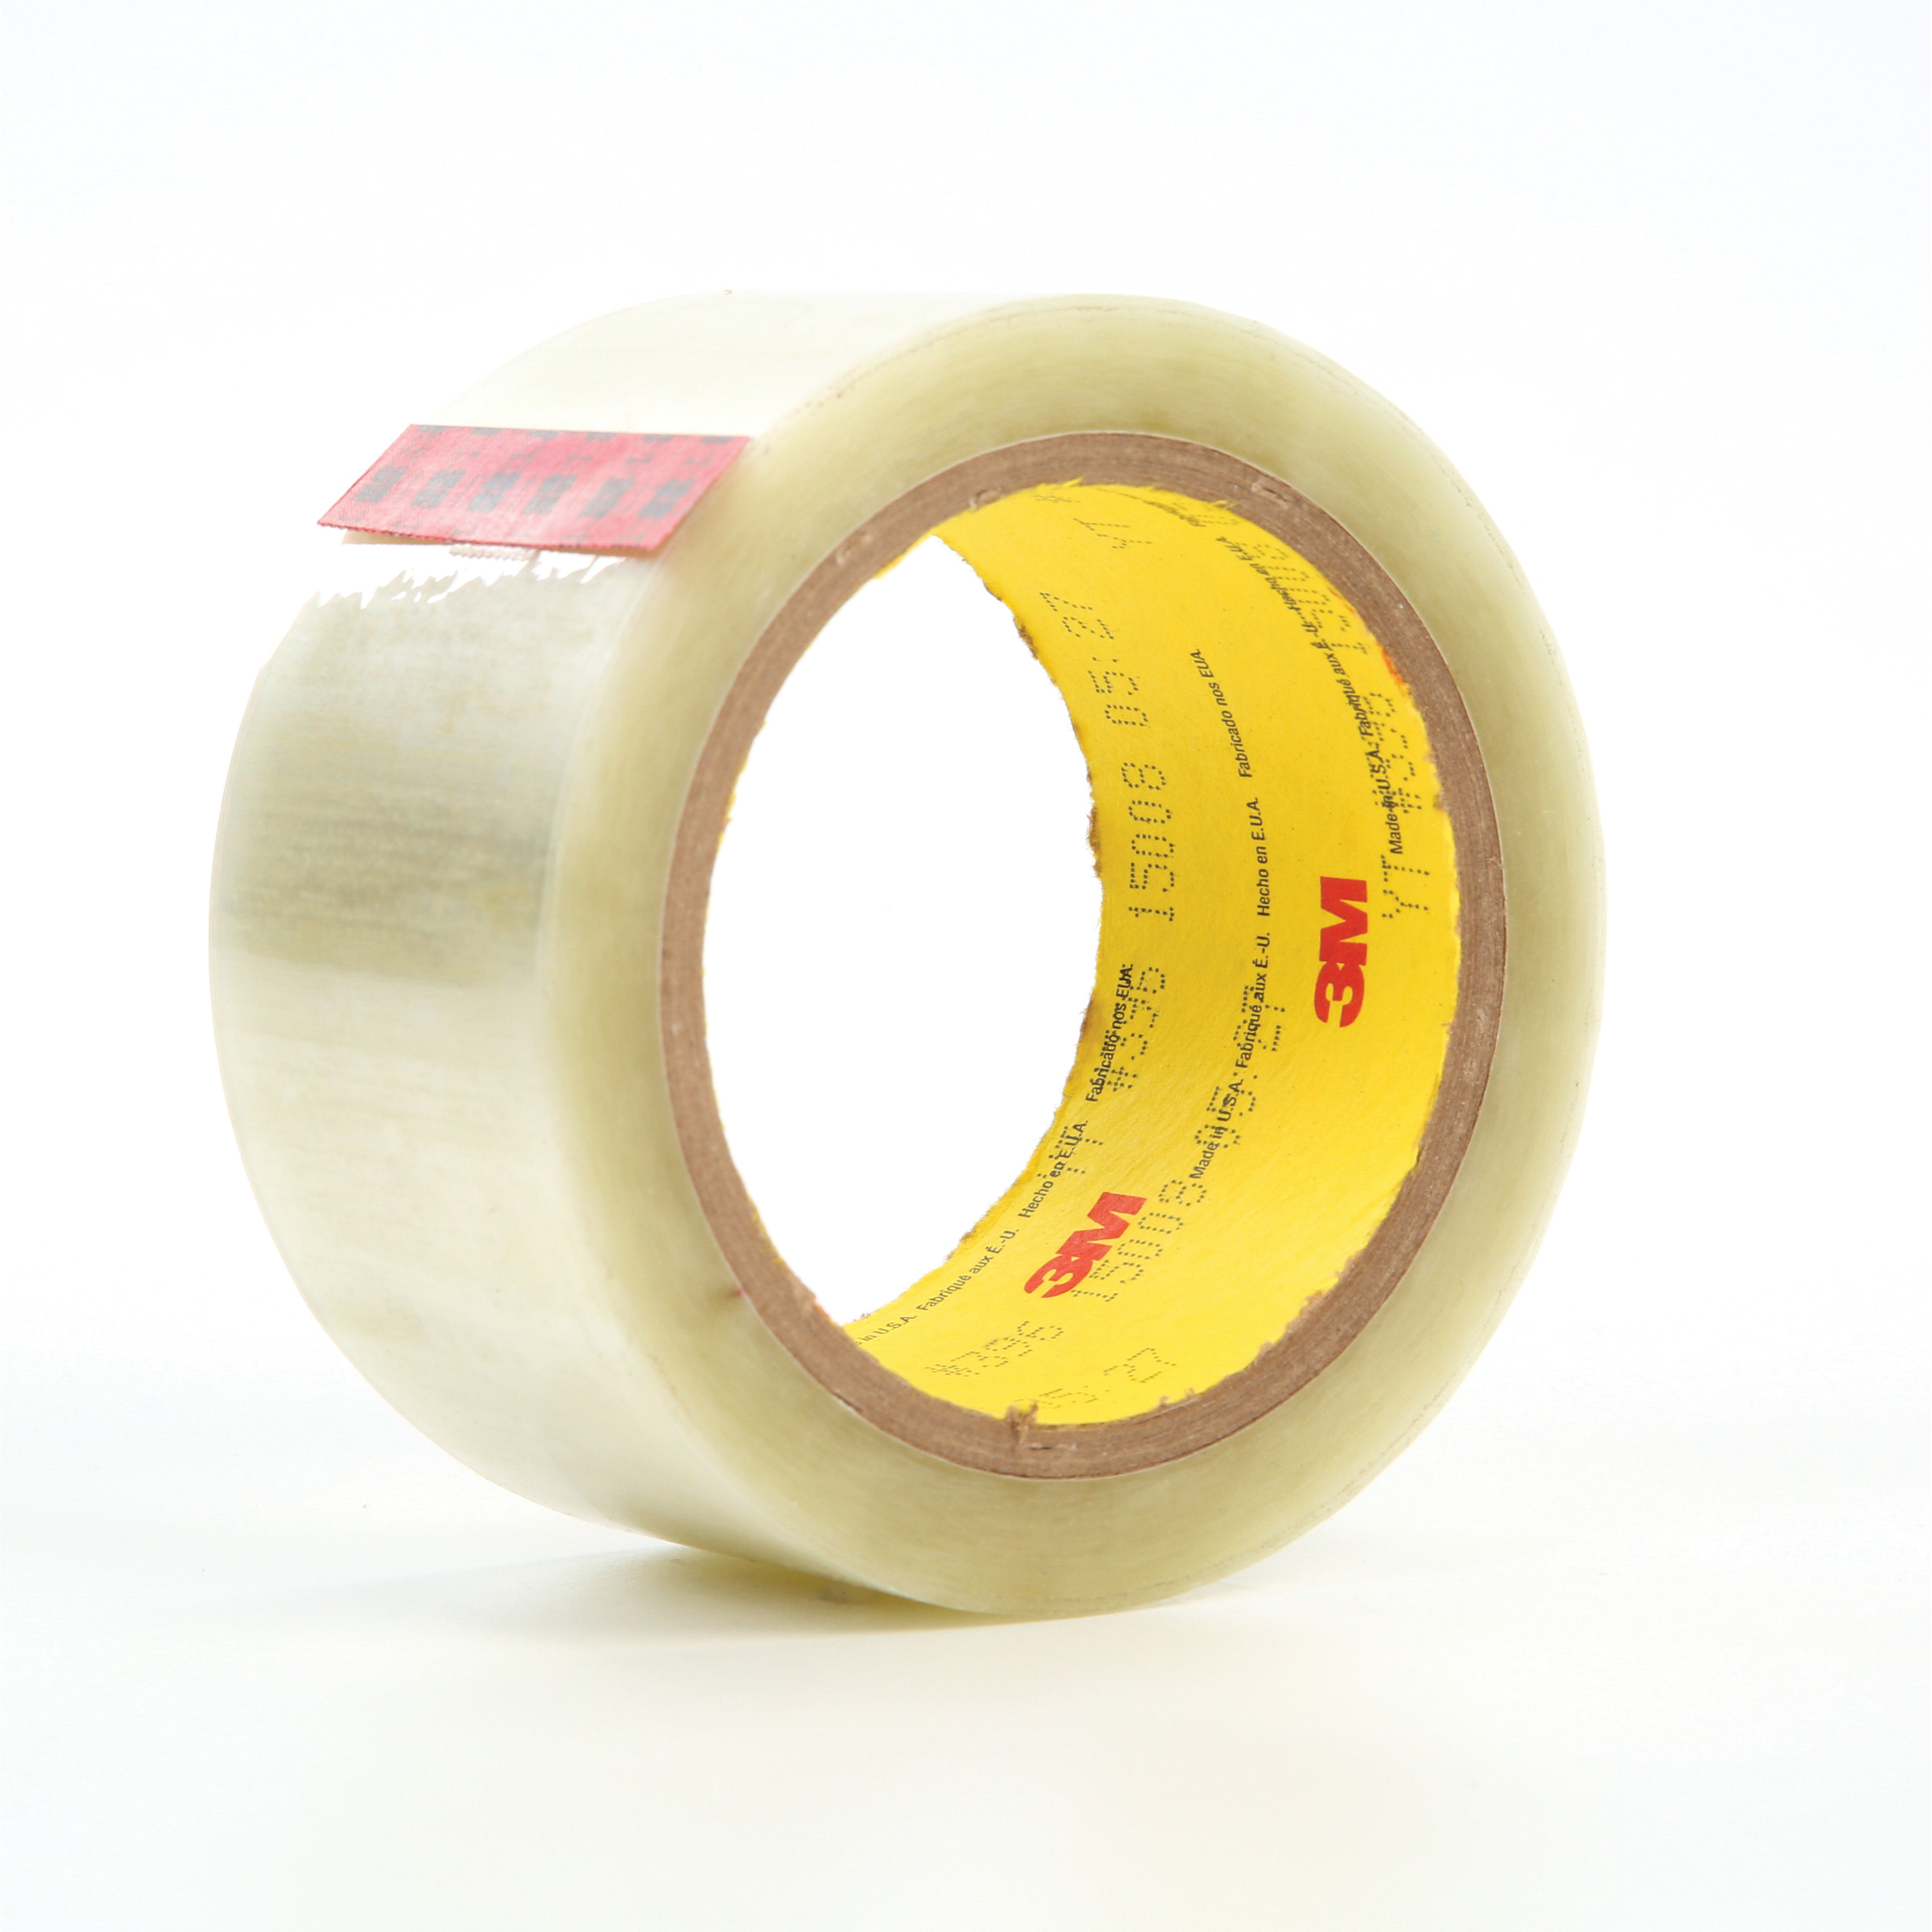 3M™ 396 5490 Super Bond Film Tape, 36 yd L x 2 in W, 4.1 mil THK, Rubber Adhesive, Polyester Backing, Transparent